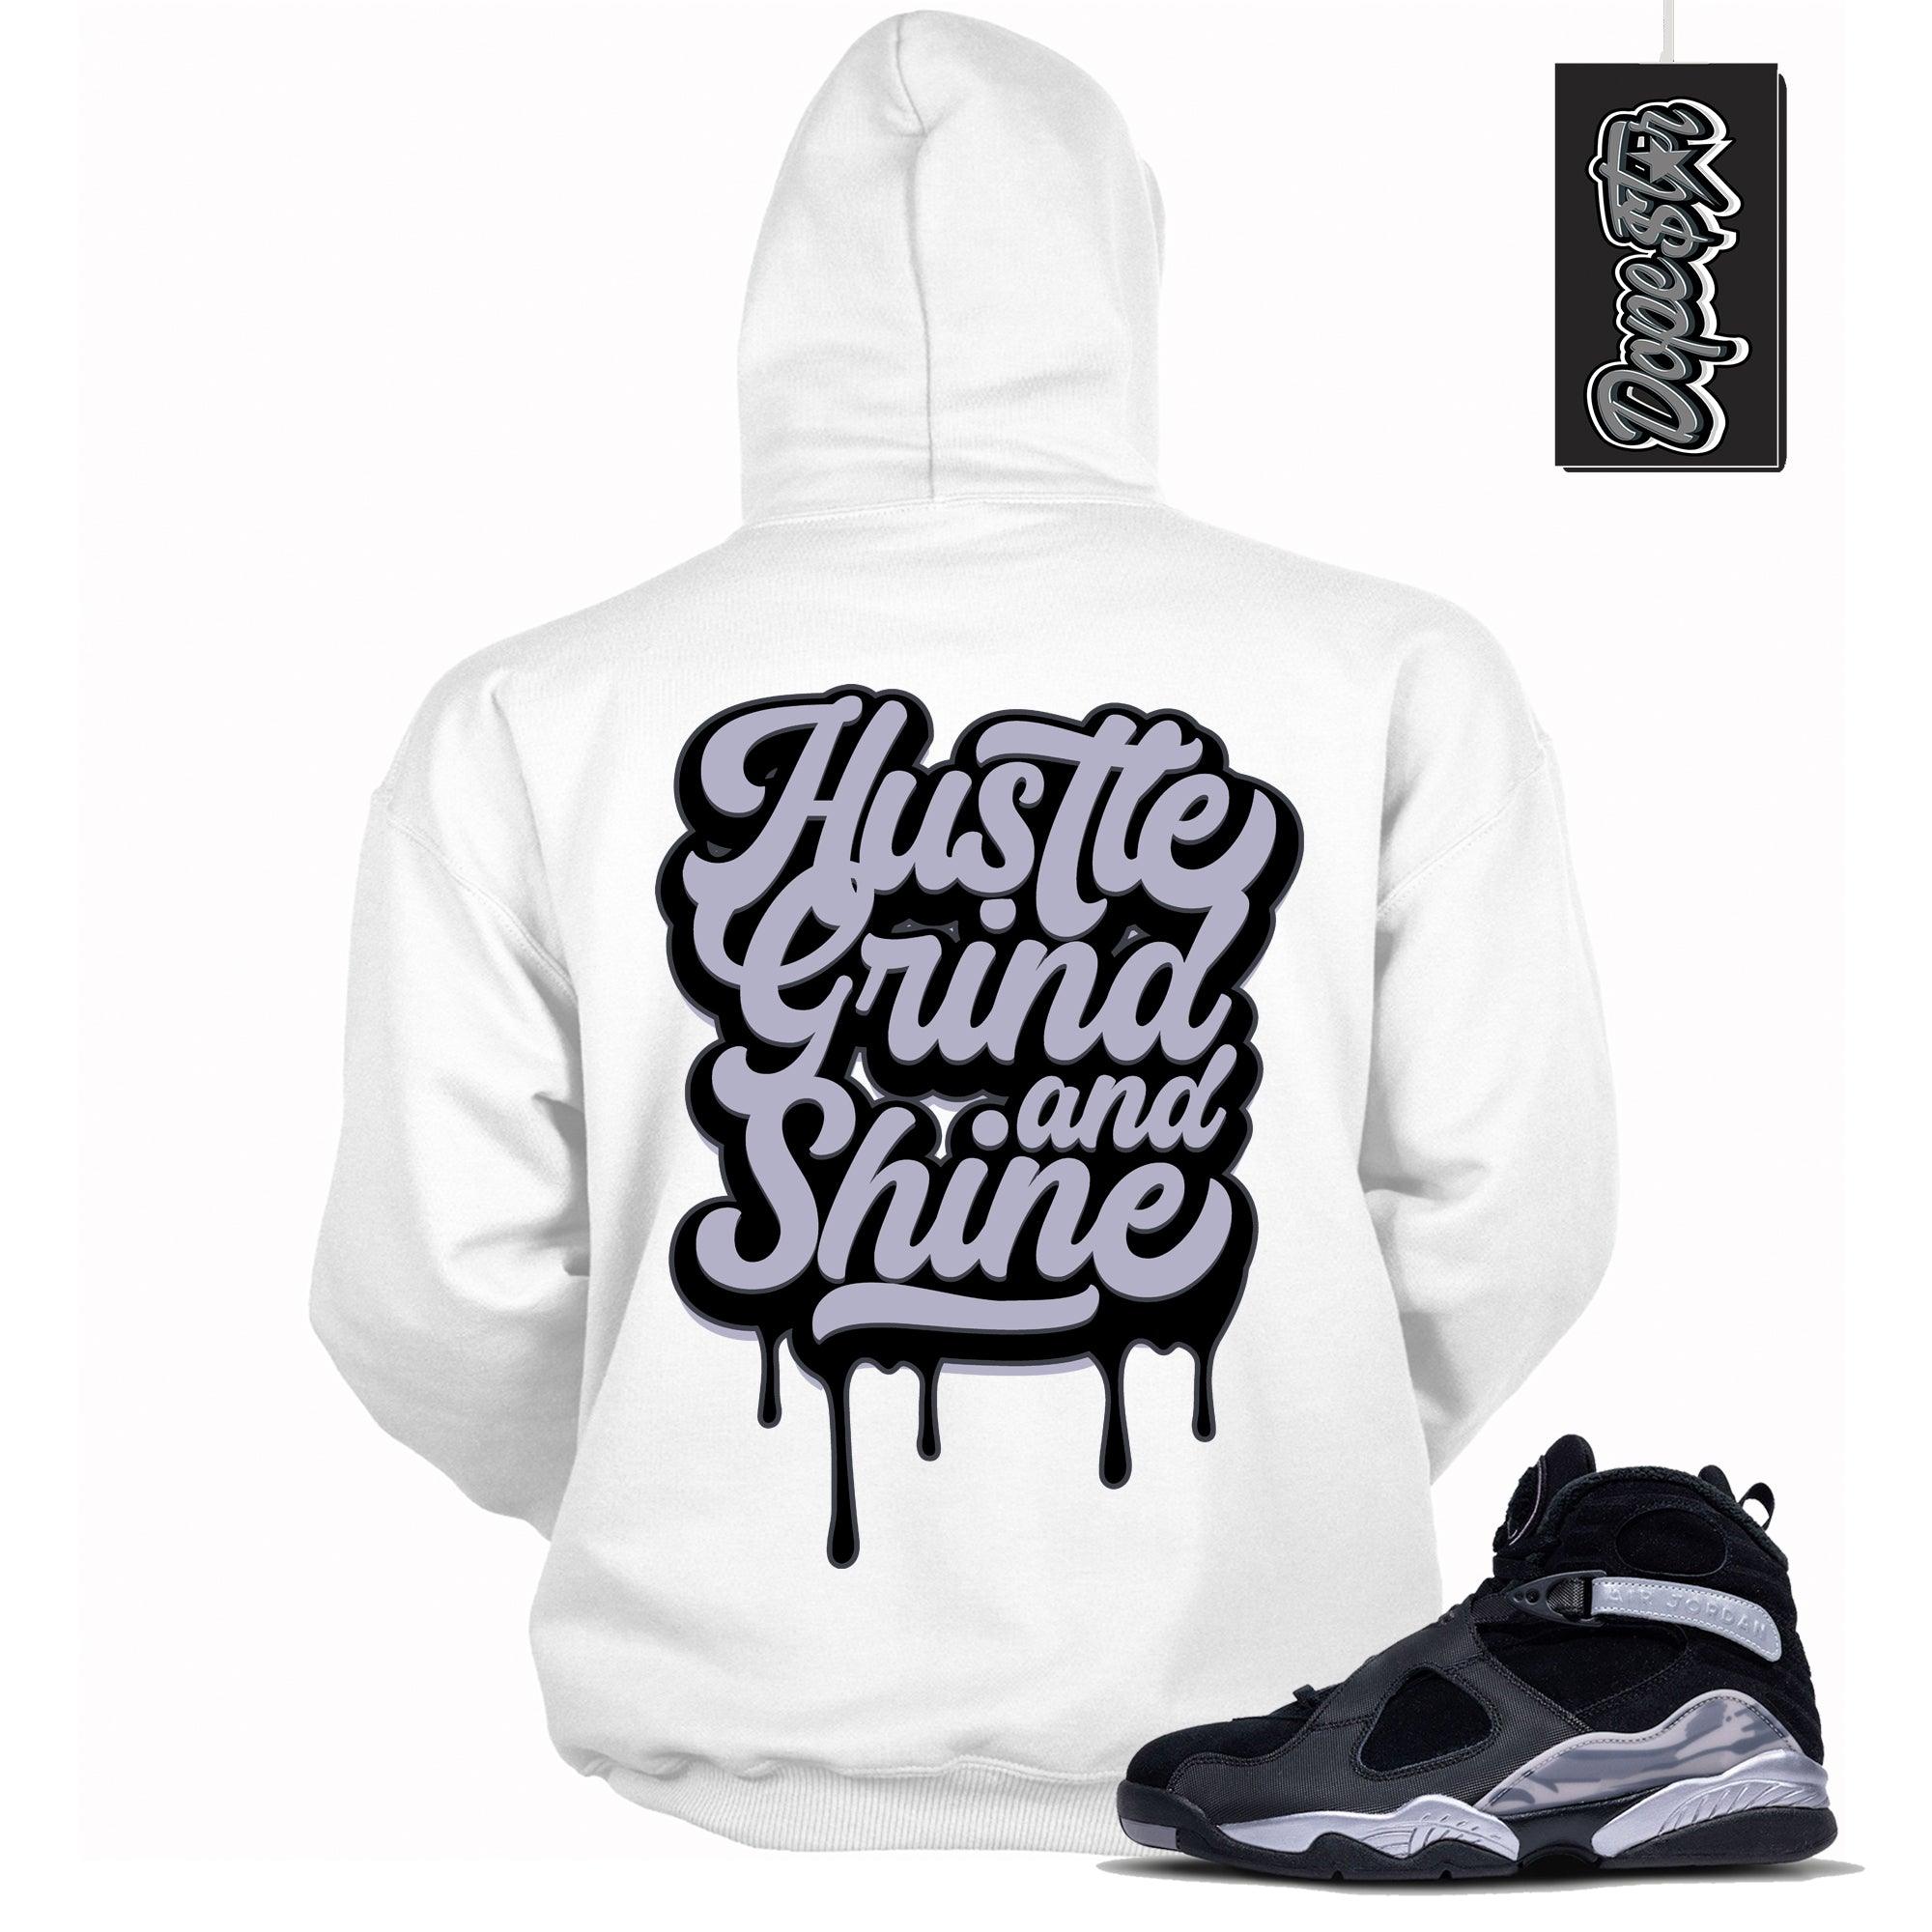 Cool White Graphic Hoodie with “ Hustle Grind and Shine “ print, that perfectly matches Air Jordan 8 Winterized  sneakers